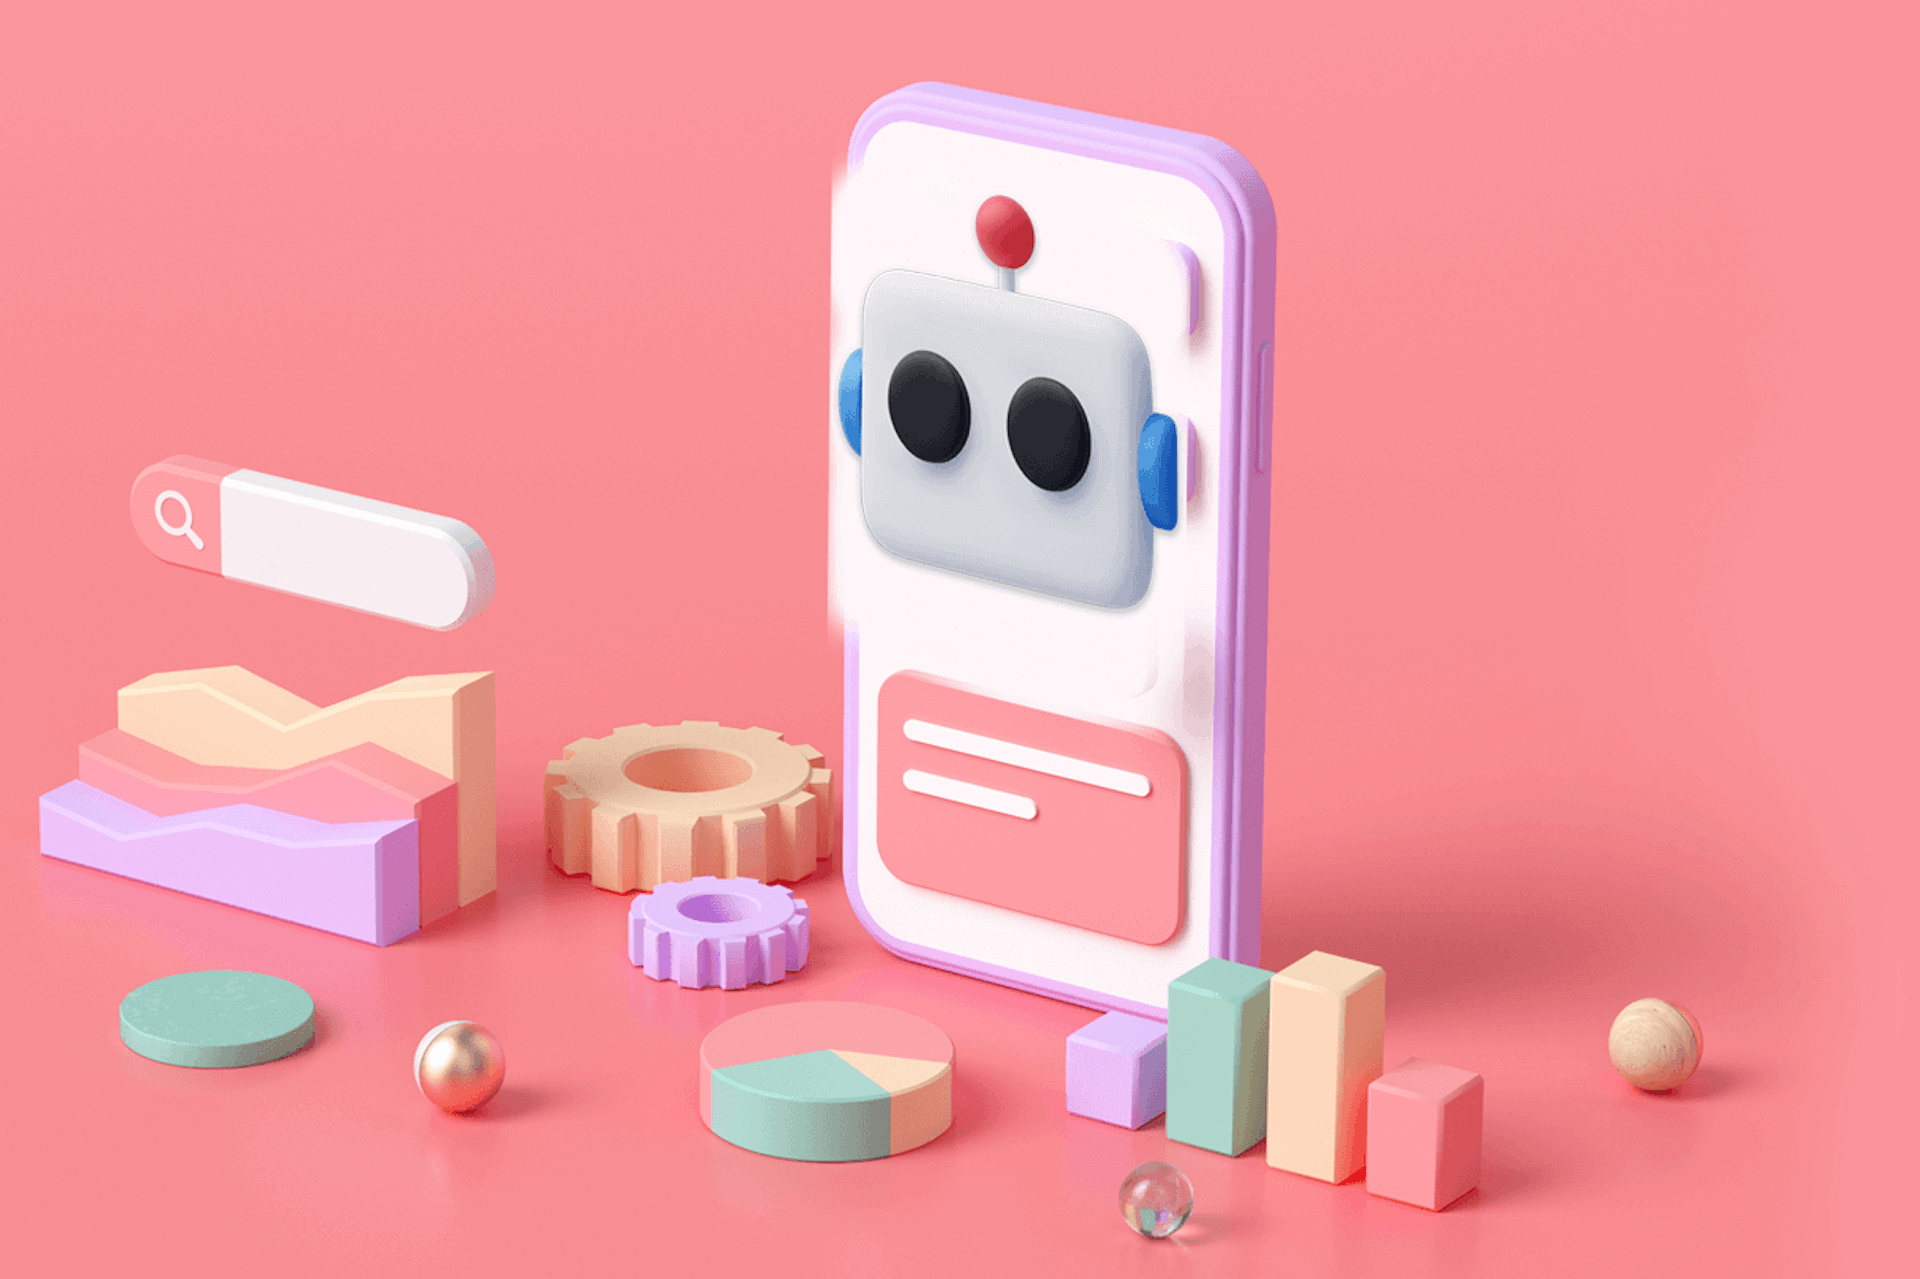 3D Illustration of a smartphone with a bot on it surrounded by AI and data analytics symbols